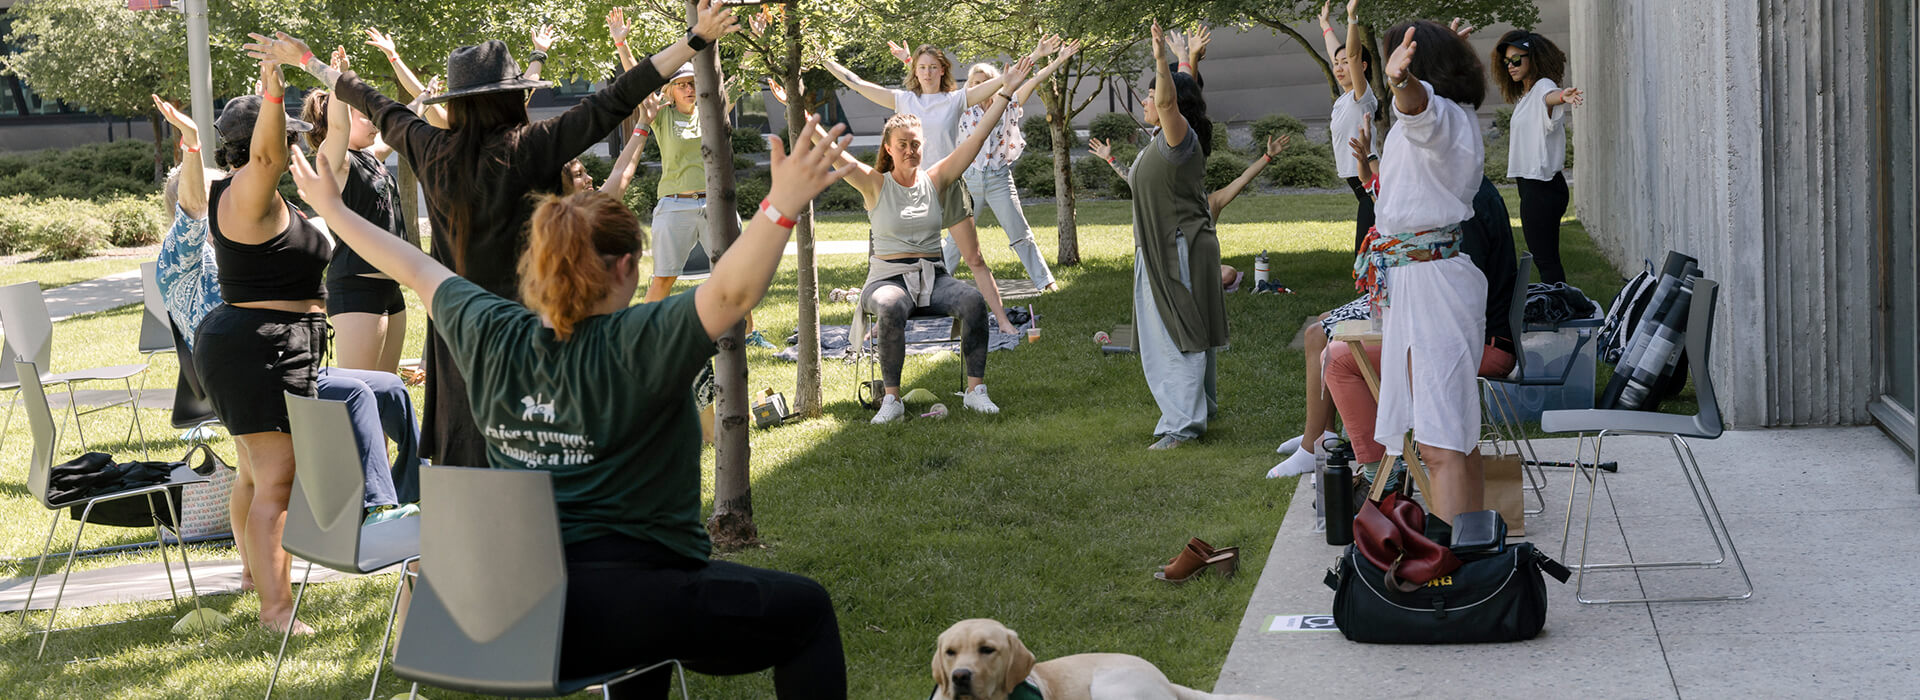 People do adaptive yoga outside during the summer